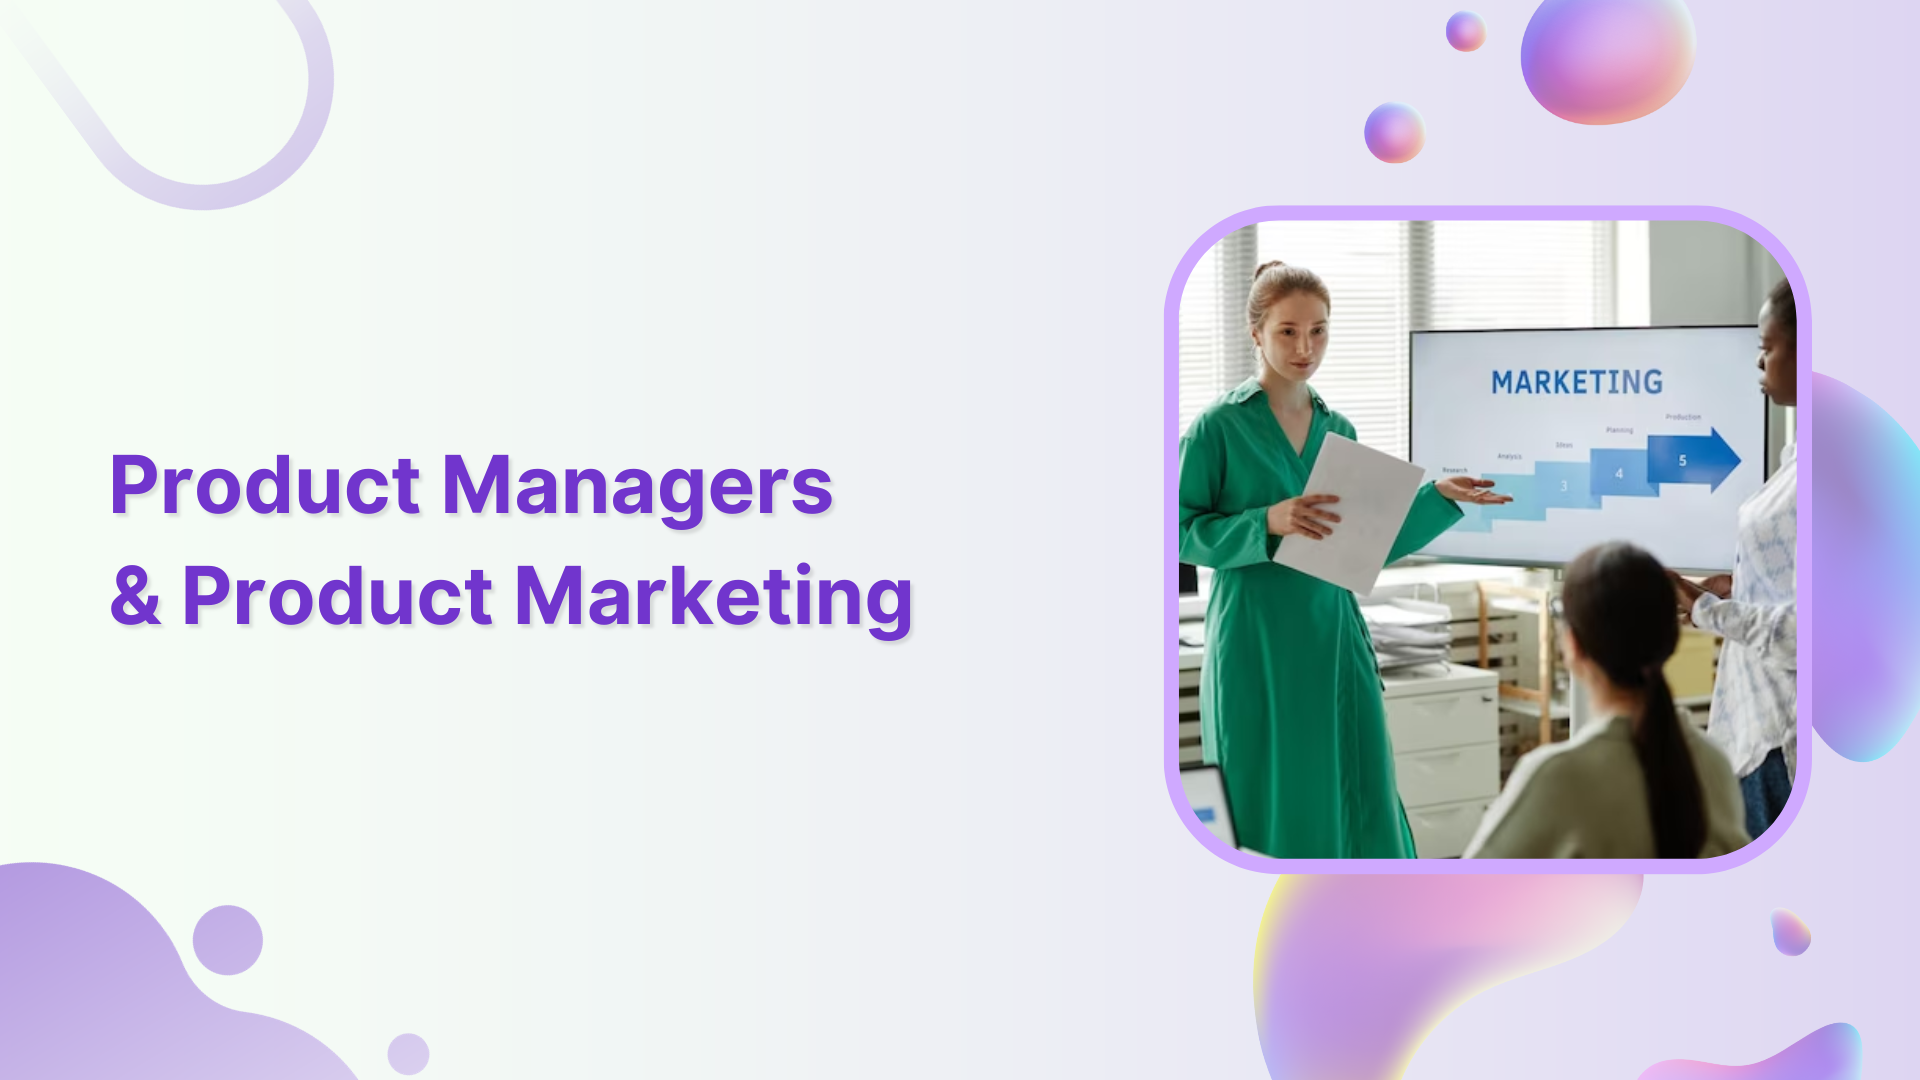 Product managers and product marketing